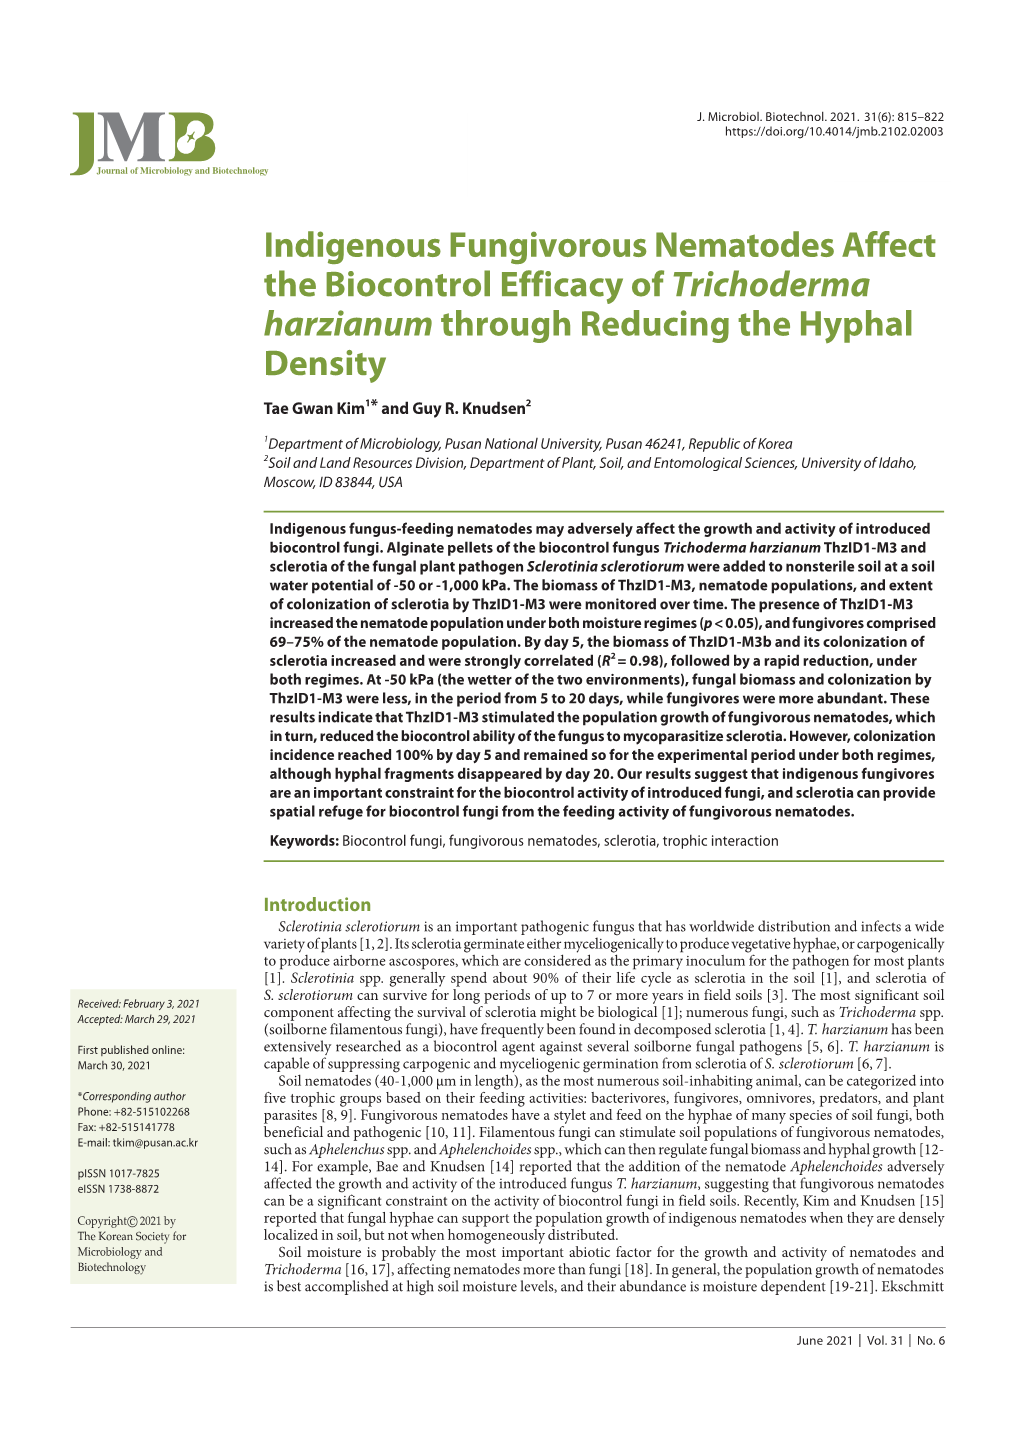 Indigenous Fungivorous Nematodes Affect the Biocontrol Efficacy of Trichoderma Harzianum Through Reducing the Hyphal Density